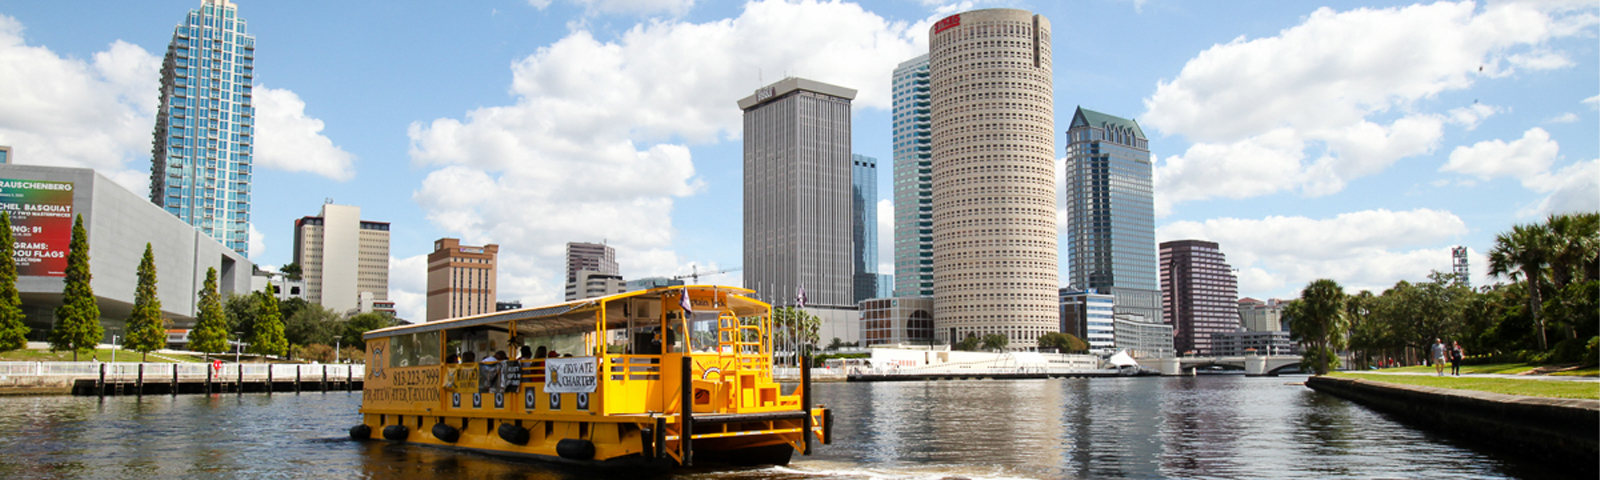 boat on the river with tampa skyline